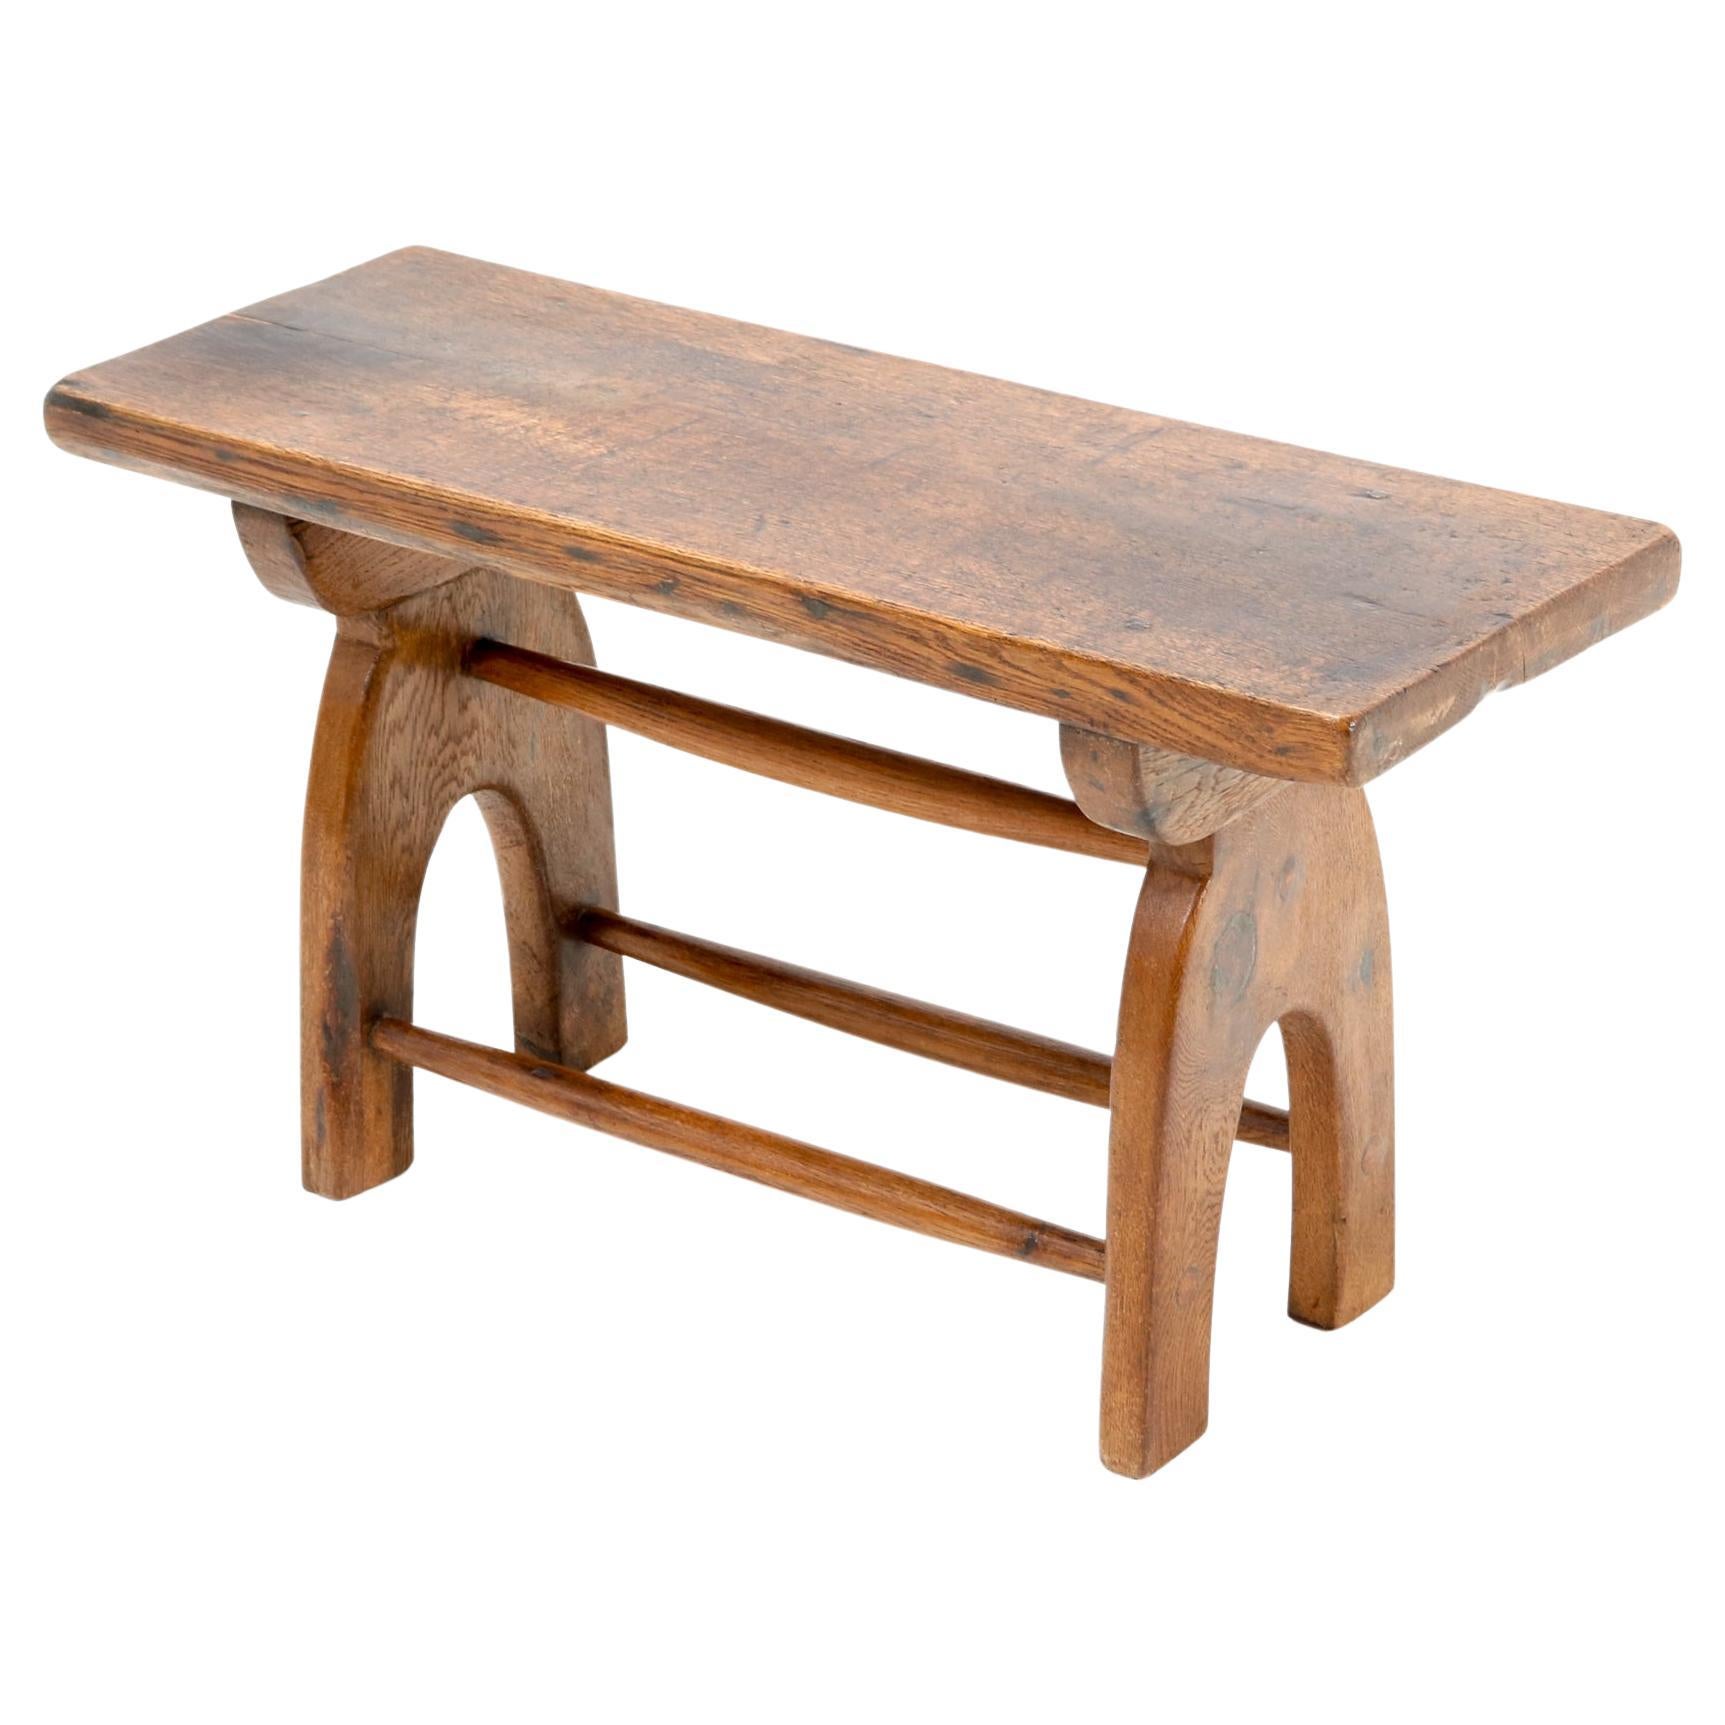 Primitive Hand-Made Rustic European Oak Countryside Bench or Side Table, 1890s